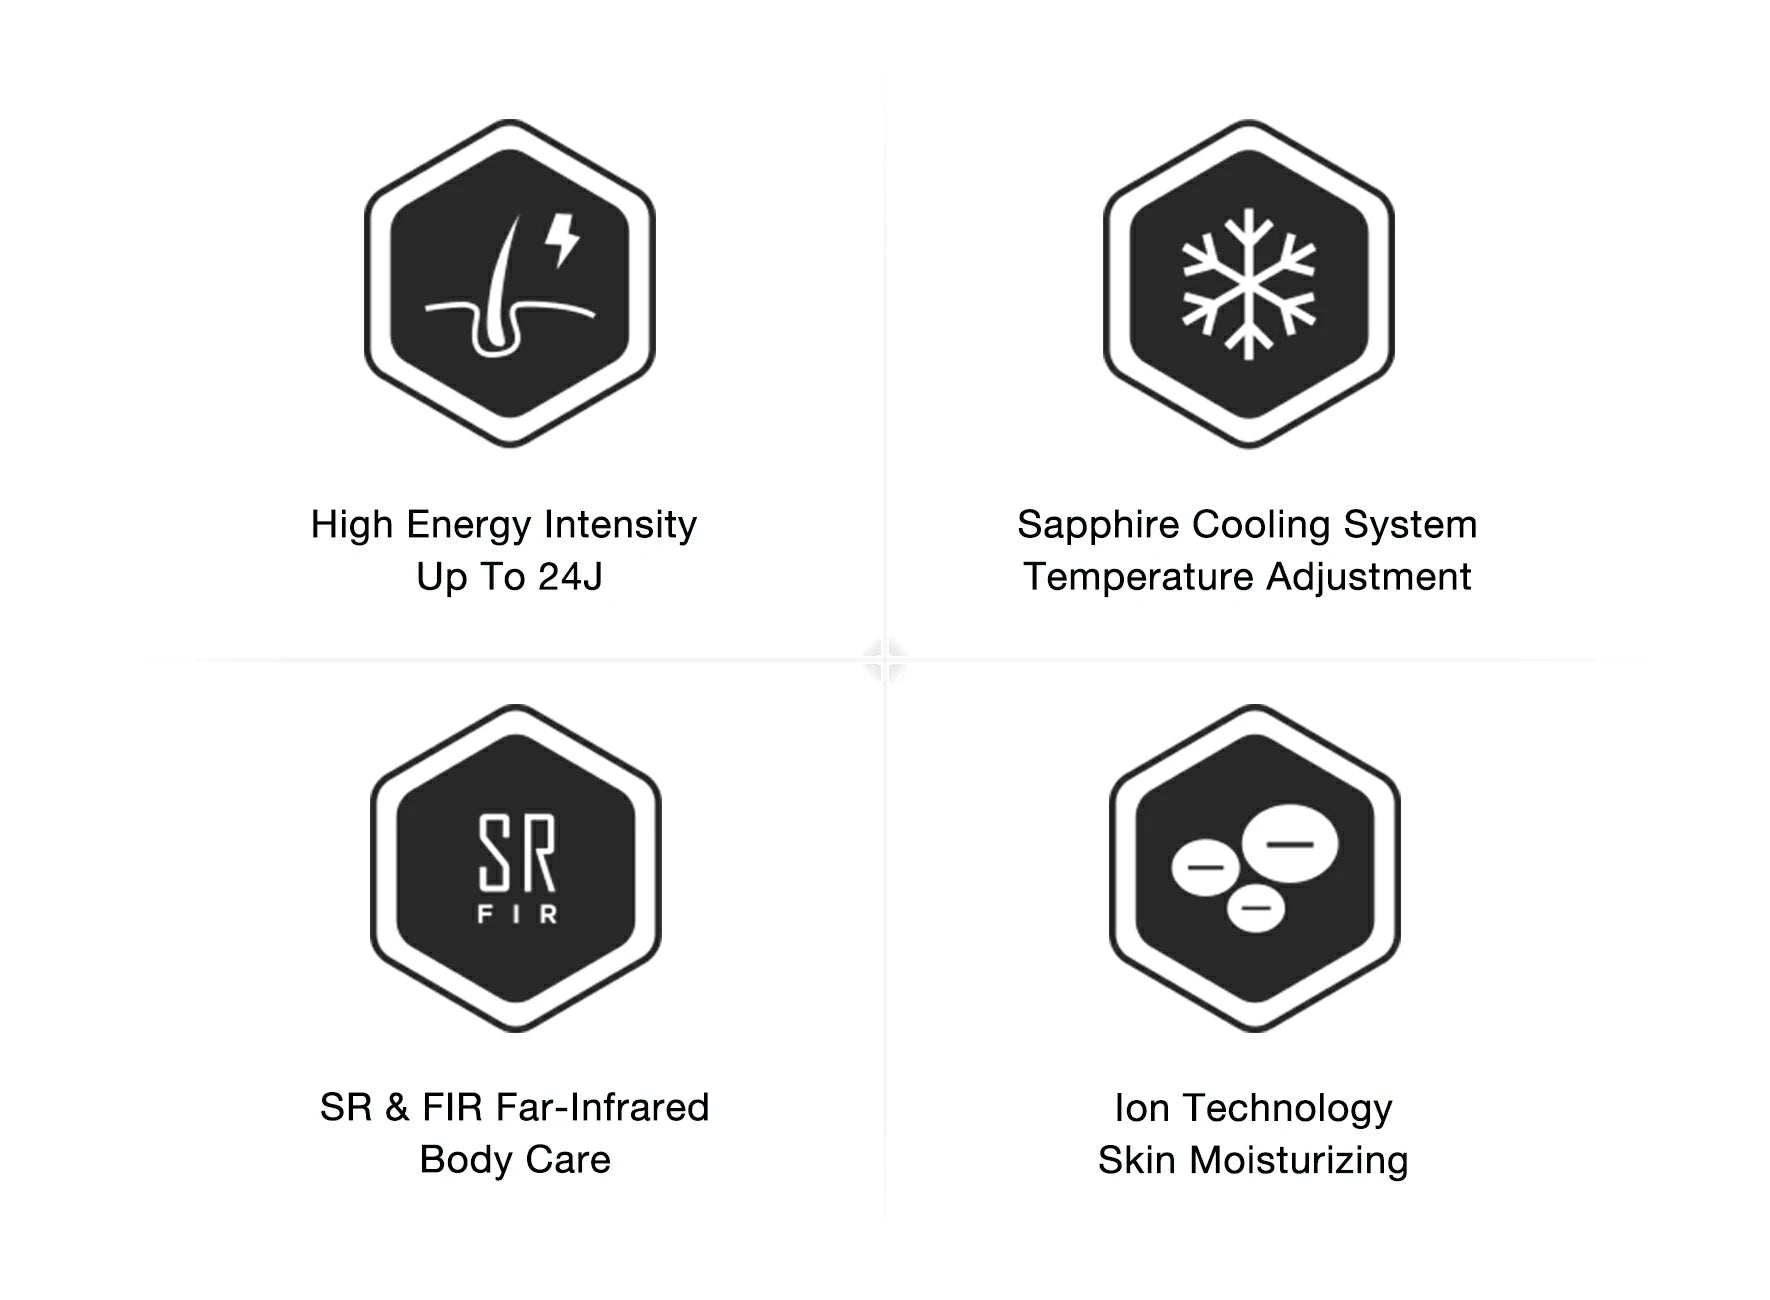 Icons depicting the high energy intensity, sapphire cooling system, far-infrared body care, and ion technology for moisturizing of the JOVS X™ Hair Removal Device.